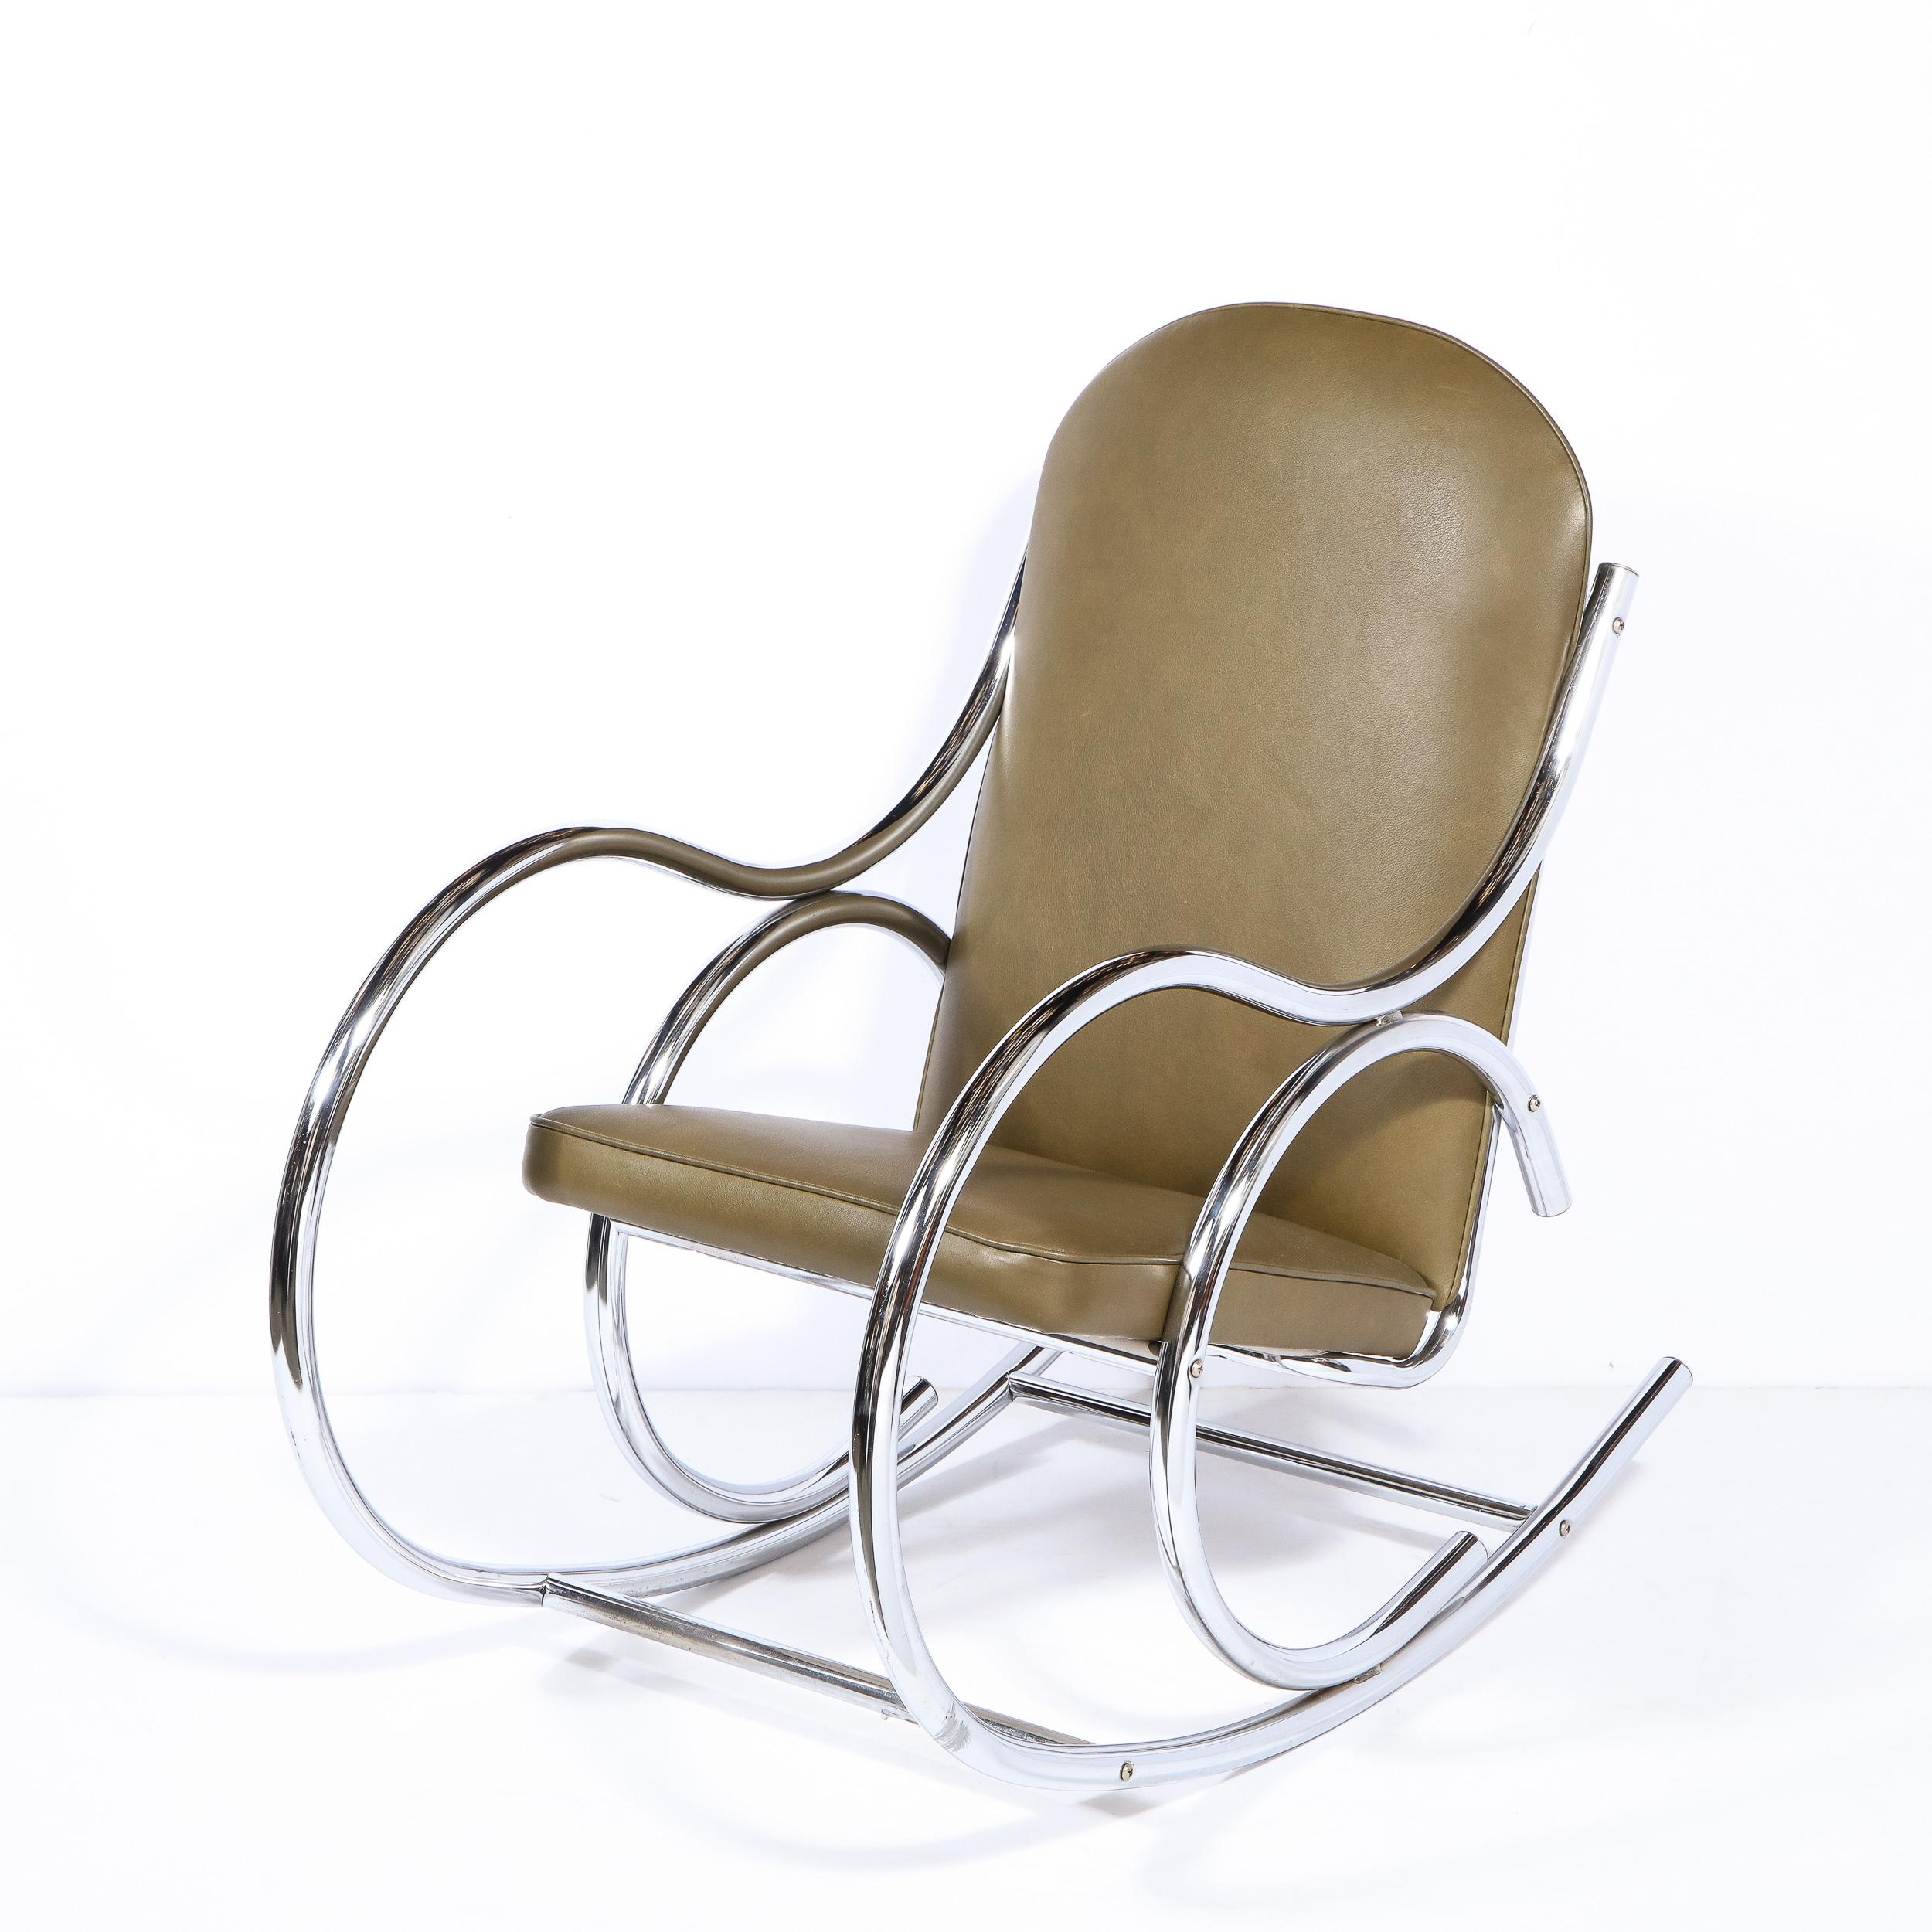 This sophisticated Mid-Century Modern rocking chair was realized in the United States circa 1970. It offers a streamlined demilune form in polished tubular chrome that creates both the arms and the feet. Additionally, there is a matching detail- of